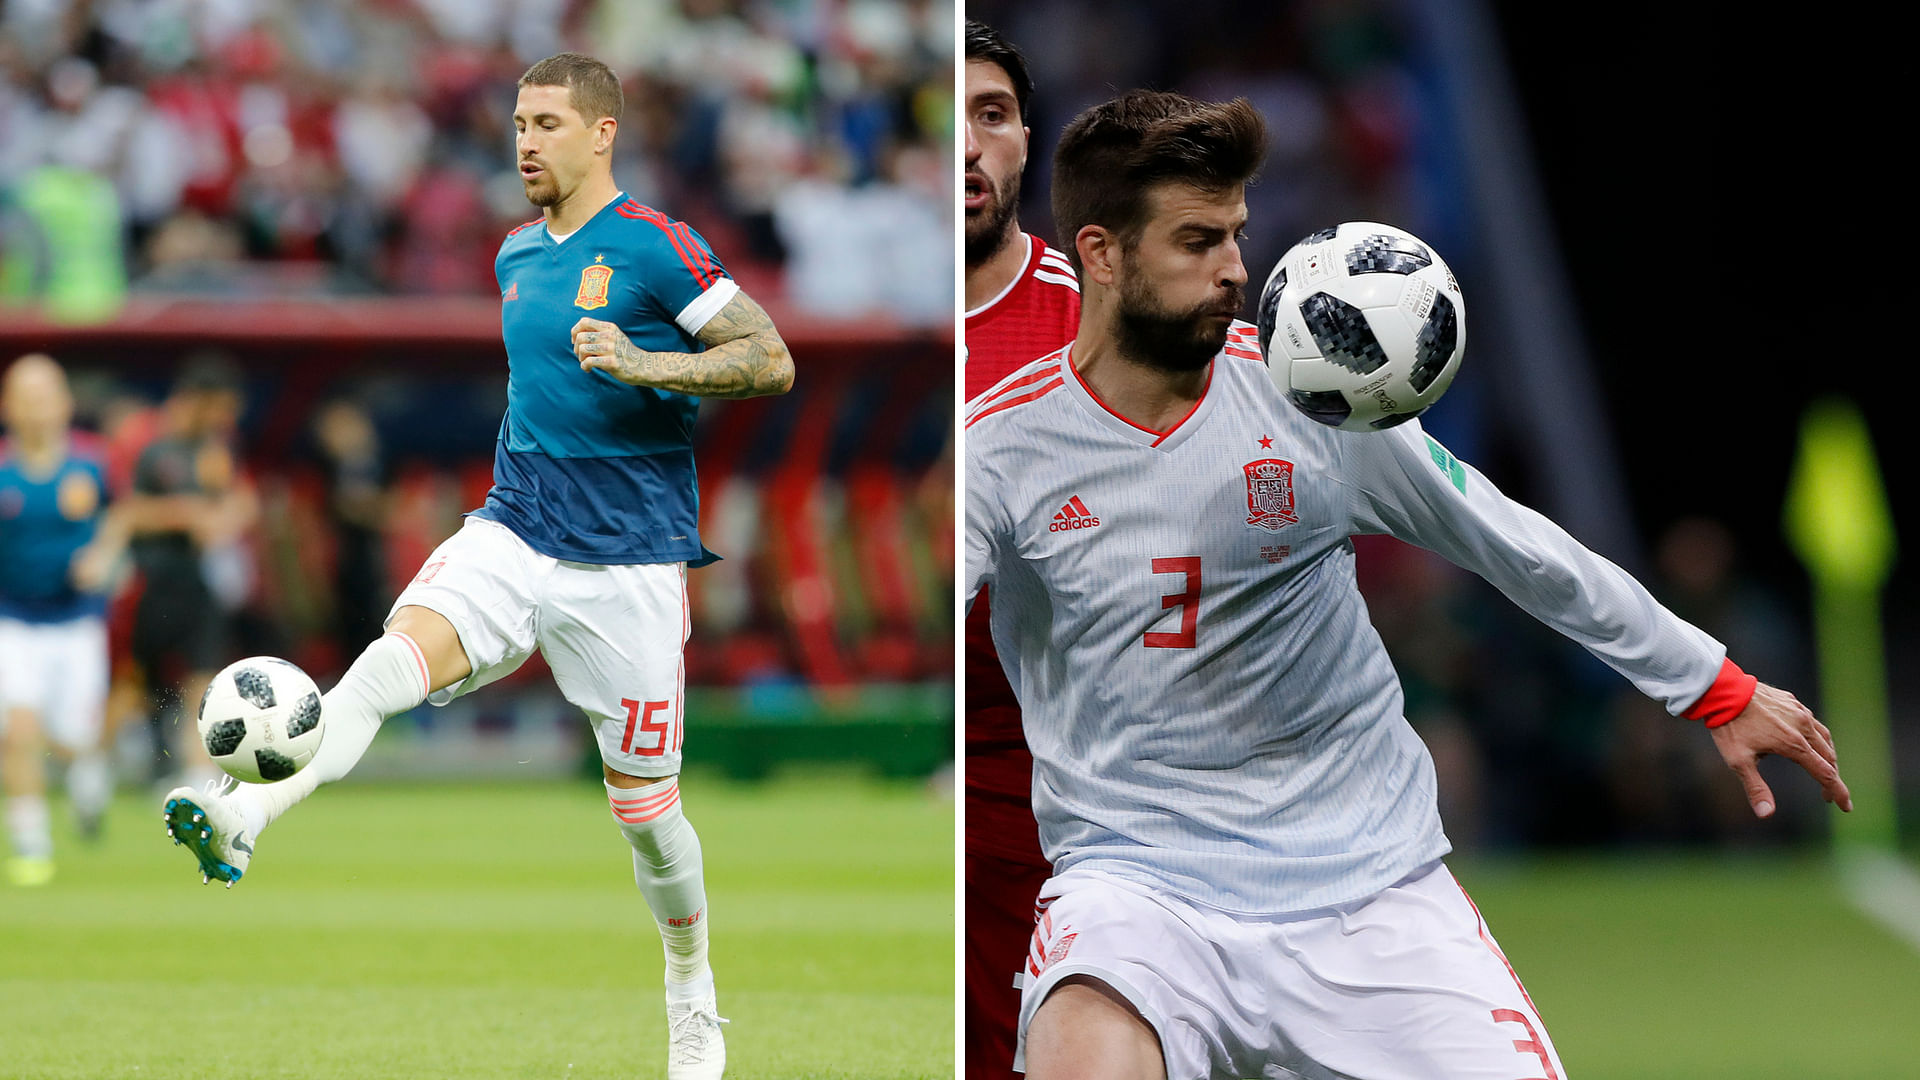 The Spanish central defence duo of Sergio Ramos and Gerard Pique is outspoken and no-nonsense both on and off the field.